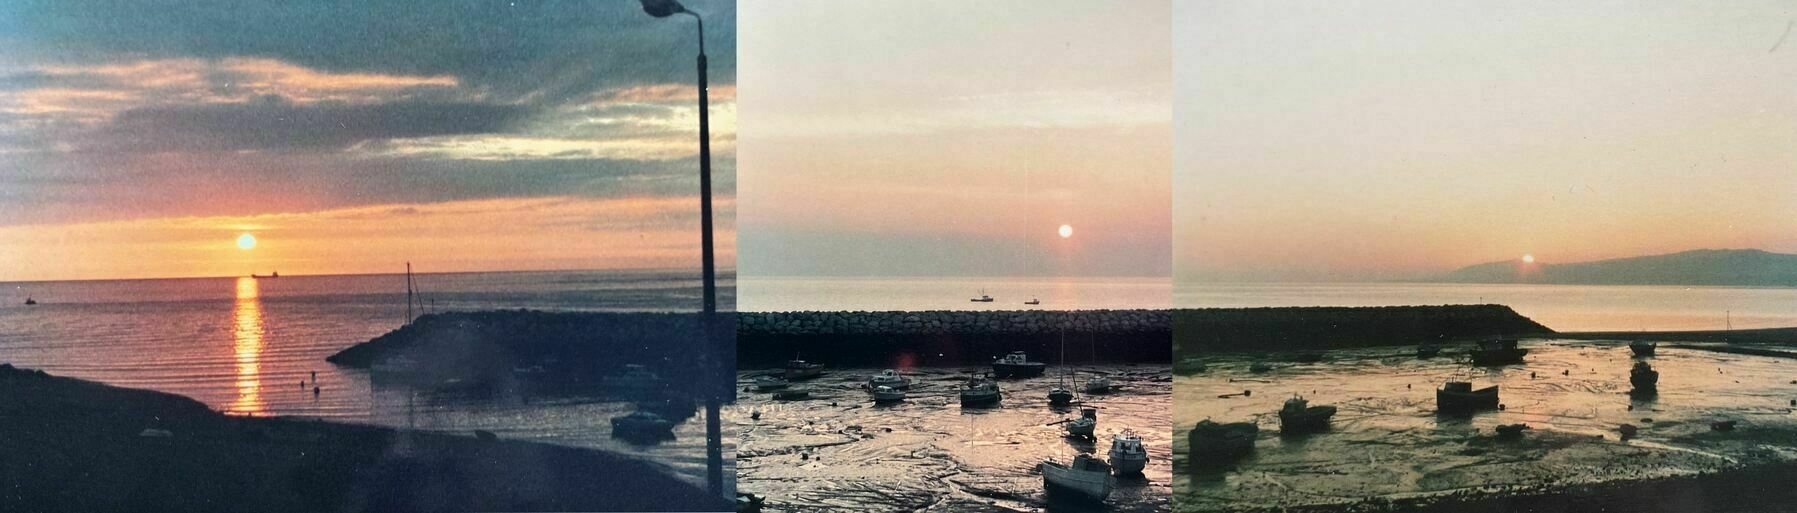 Compilation of three sunrises  across Colwyn Bay through the year